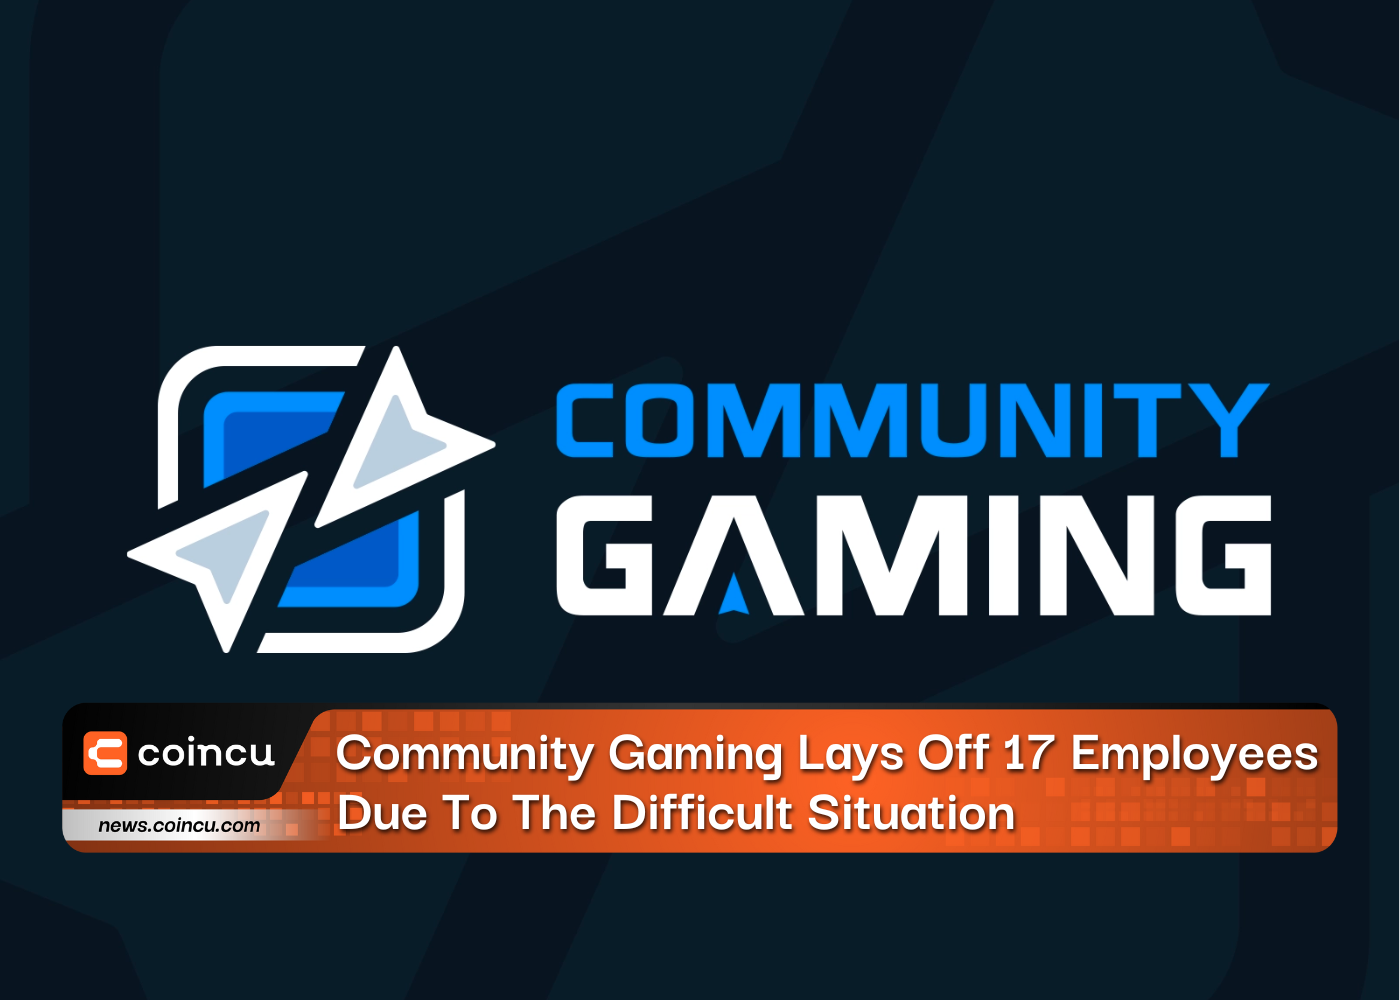 Community Gaming Lays Off 17 Employees Due To The Difficult Situation